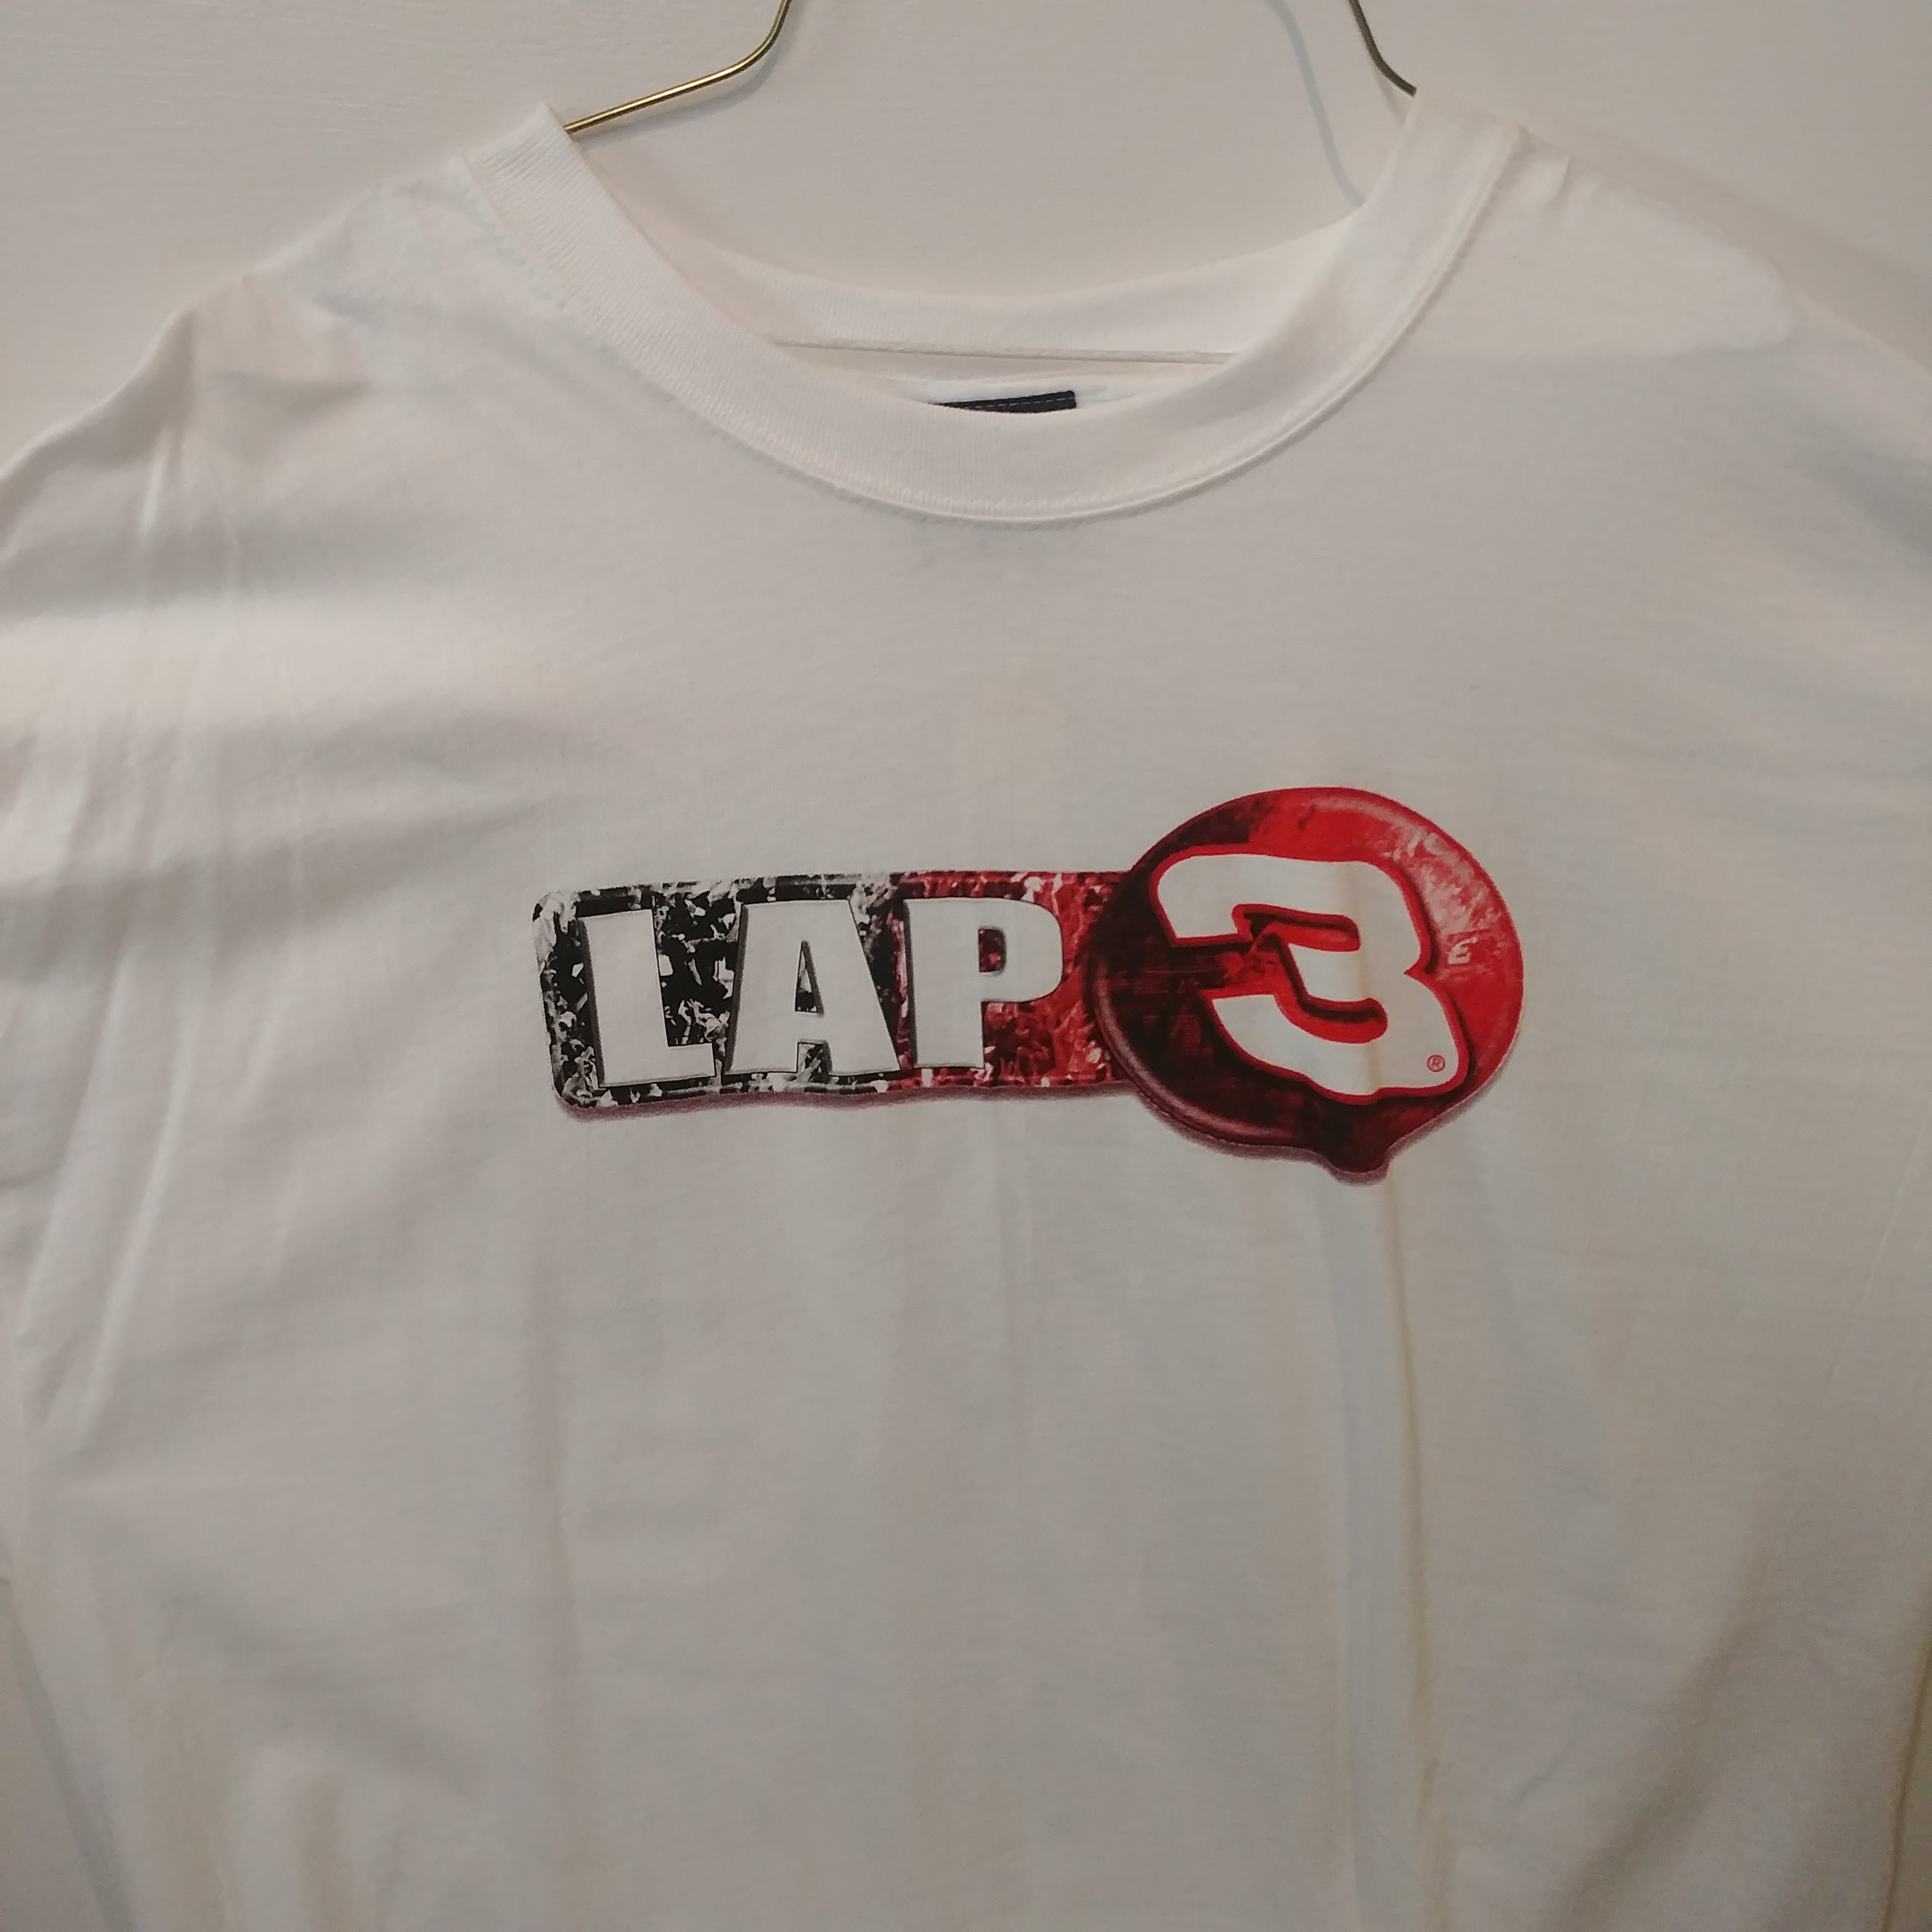 2001 Dale Earnhardt Lap 3 "Forever The Man" tee